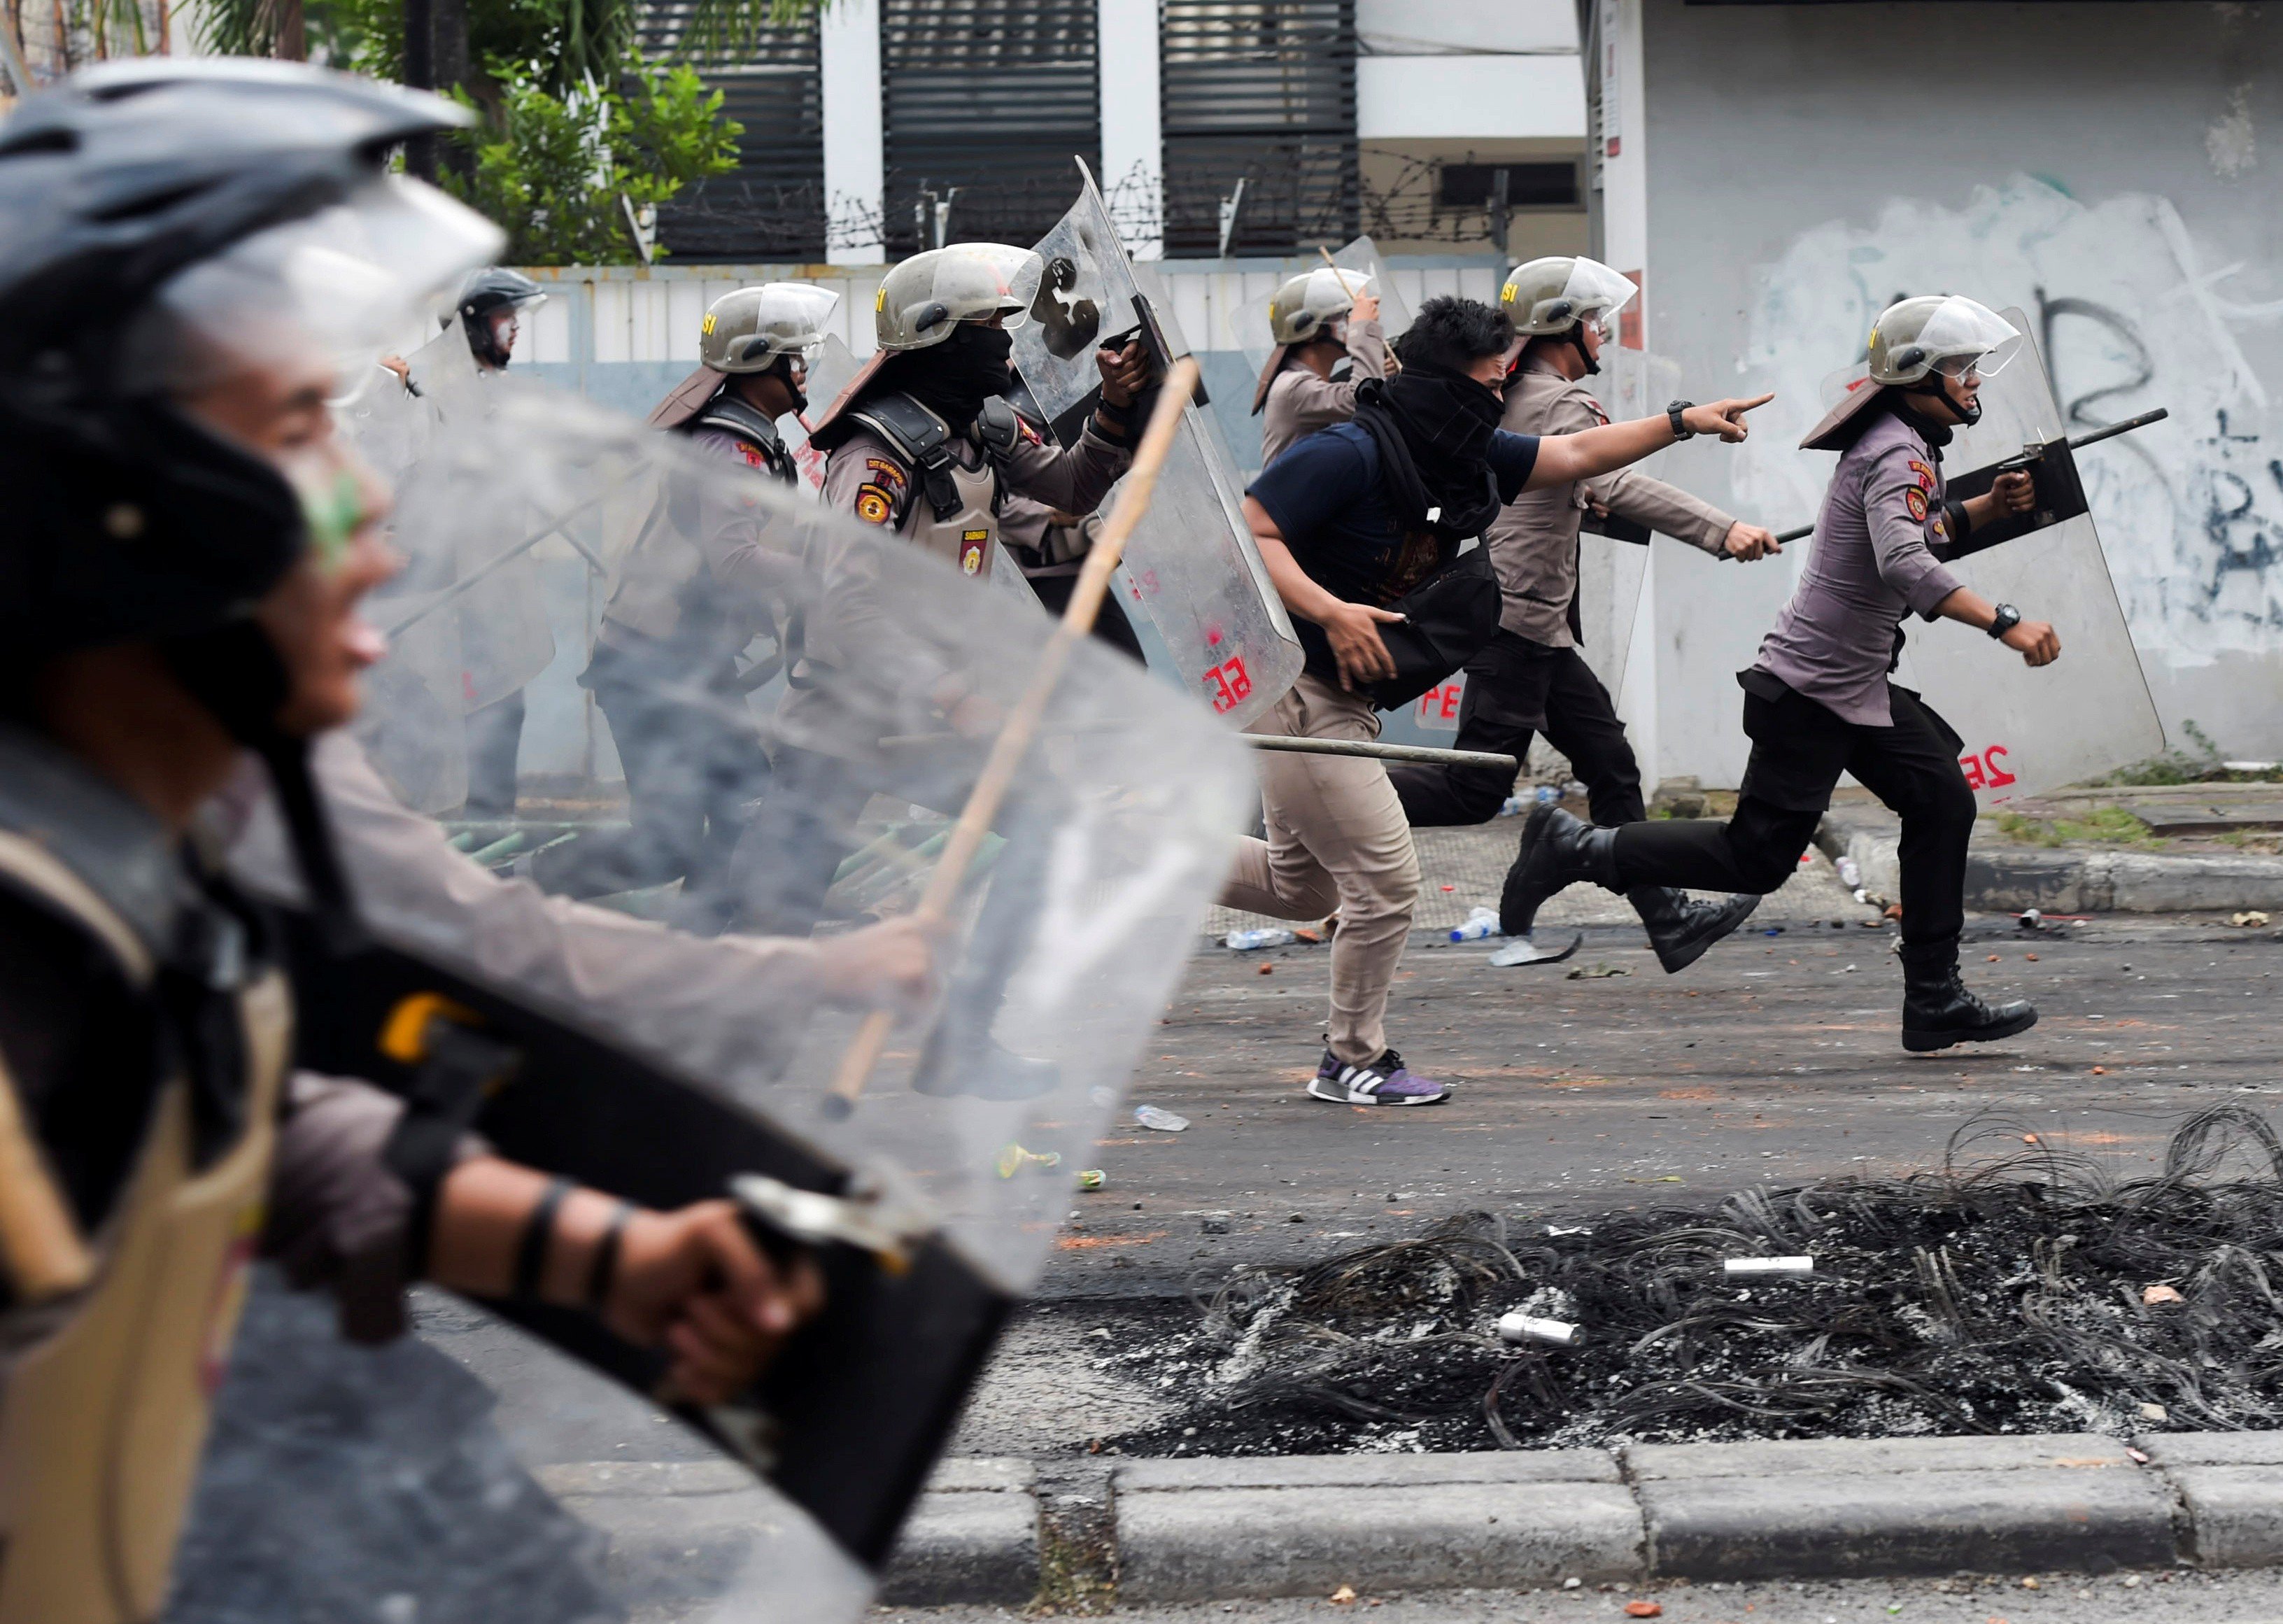 Police disperse protesters at Tanah Abang in Jakarta. Photo: Reuters